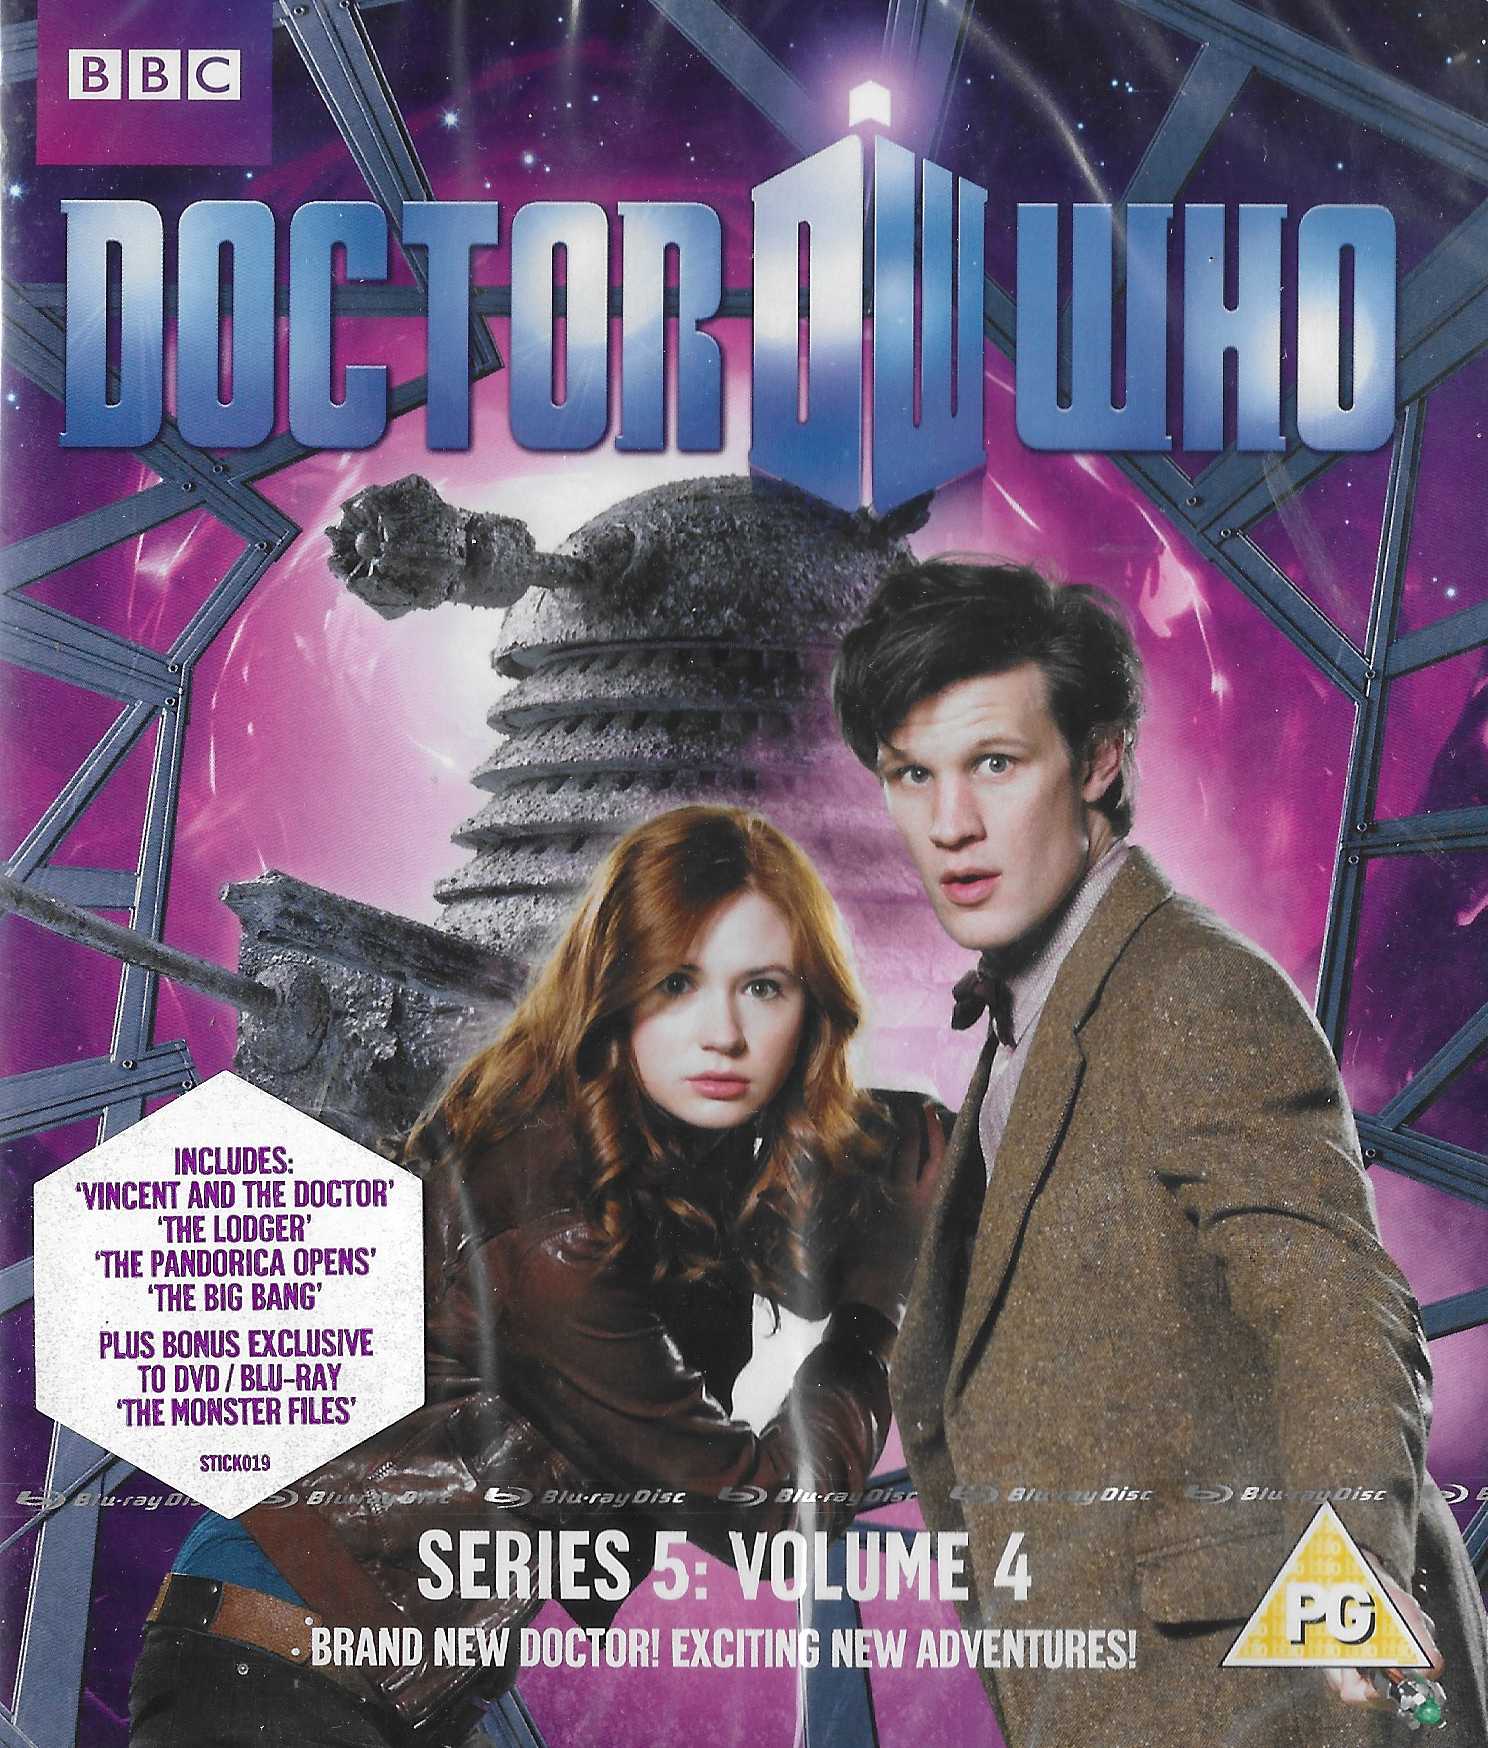 Picture of Doctor Who - Series 5, volume 4 by artist Richard Curtis / Gareth Roberts / Steven Moffatt from the BBC blu-rays - Records and Tapes library